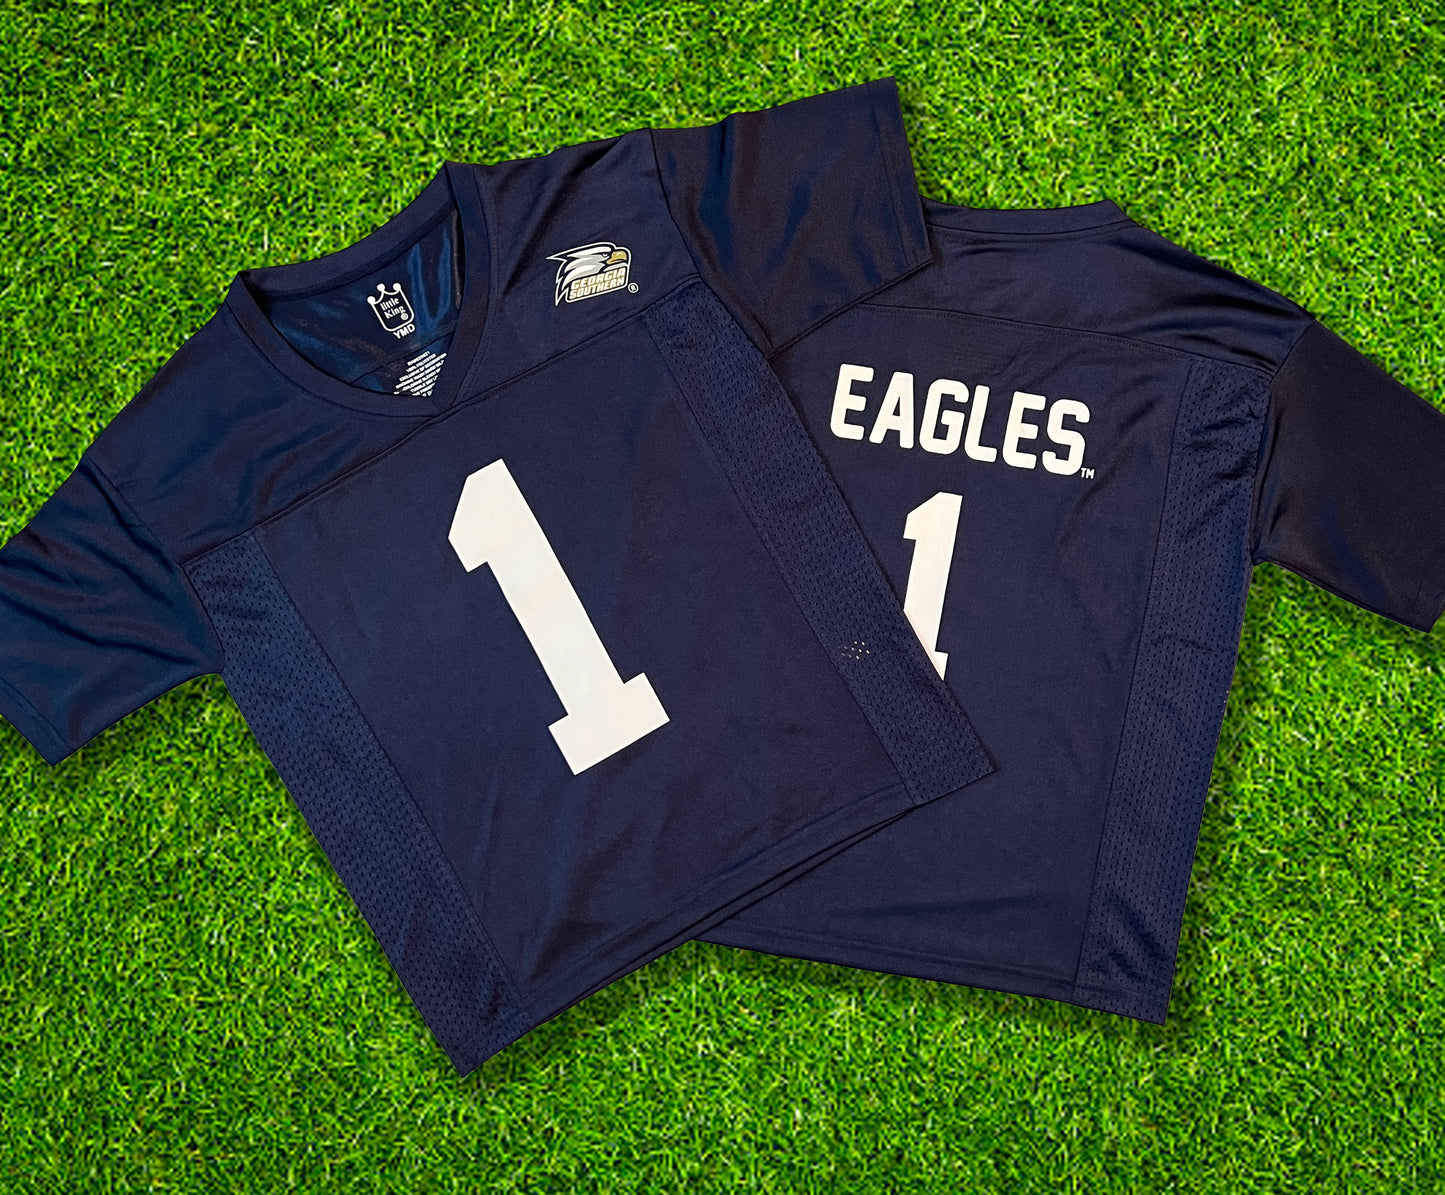 YOUTH NAVY BLUE Replica Home Jersey - #1